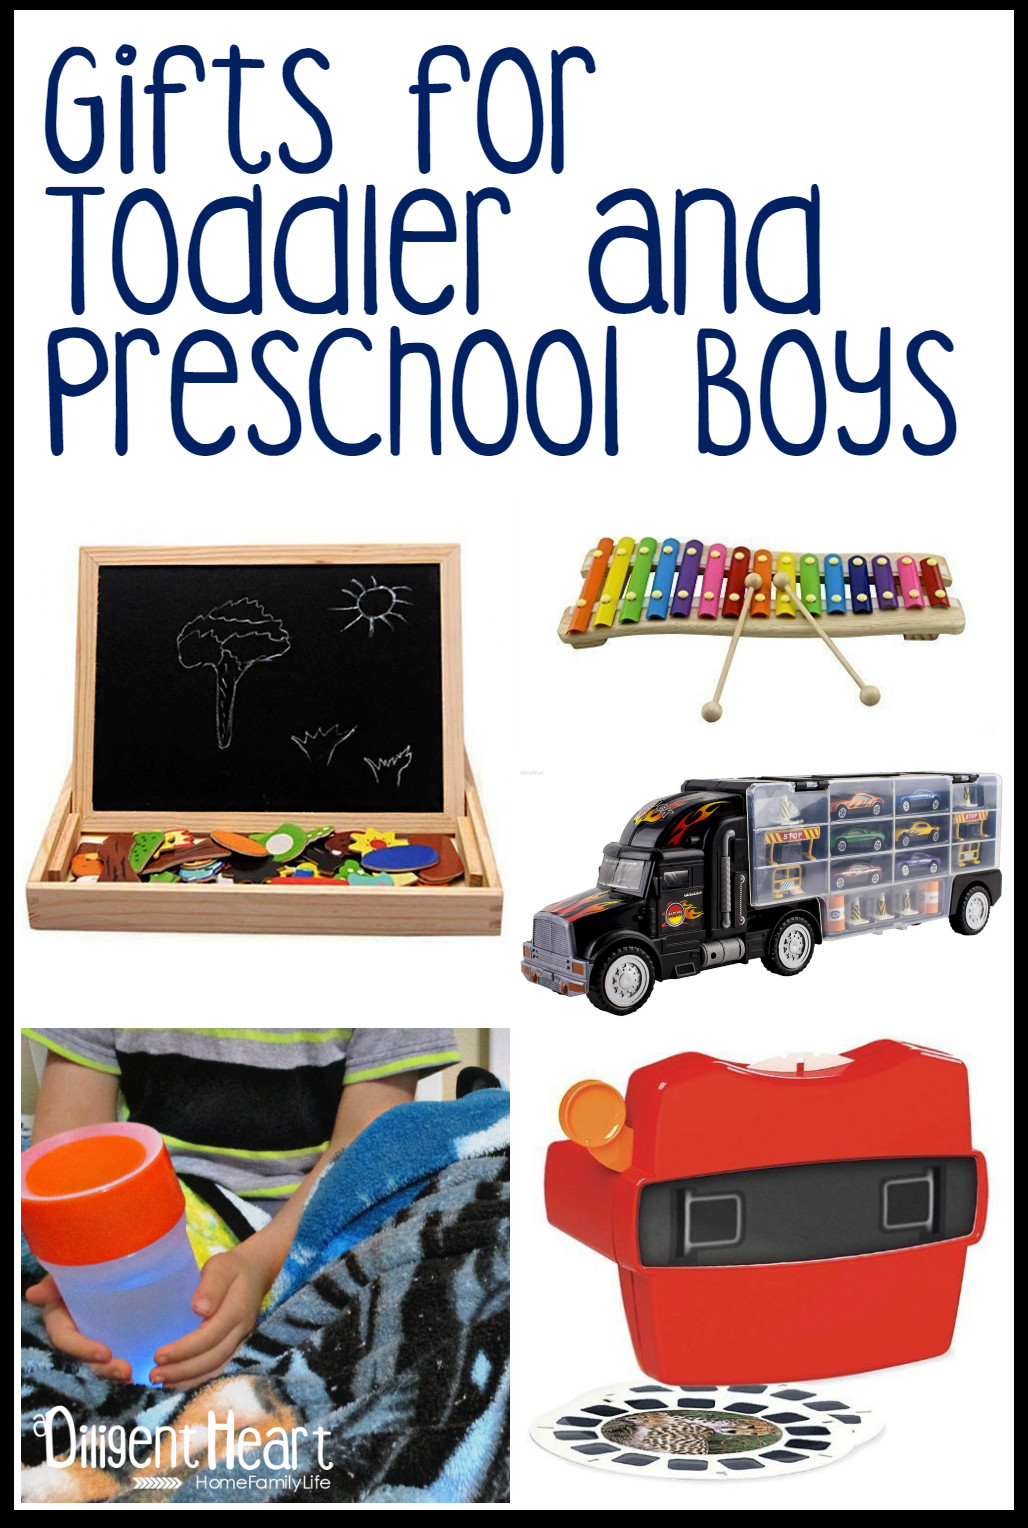 Toddler Boys Gift Ideas
 Gifts For Toddler and Preschool Boys